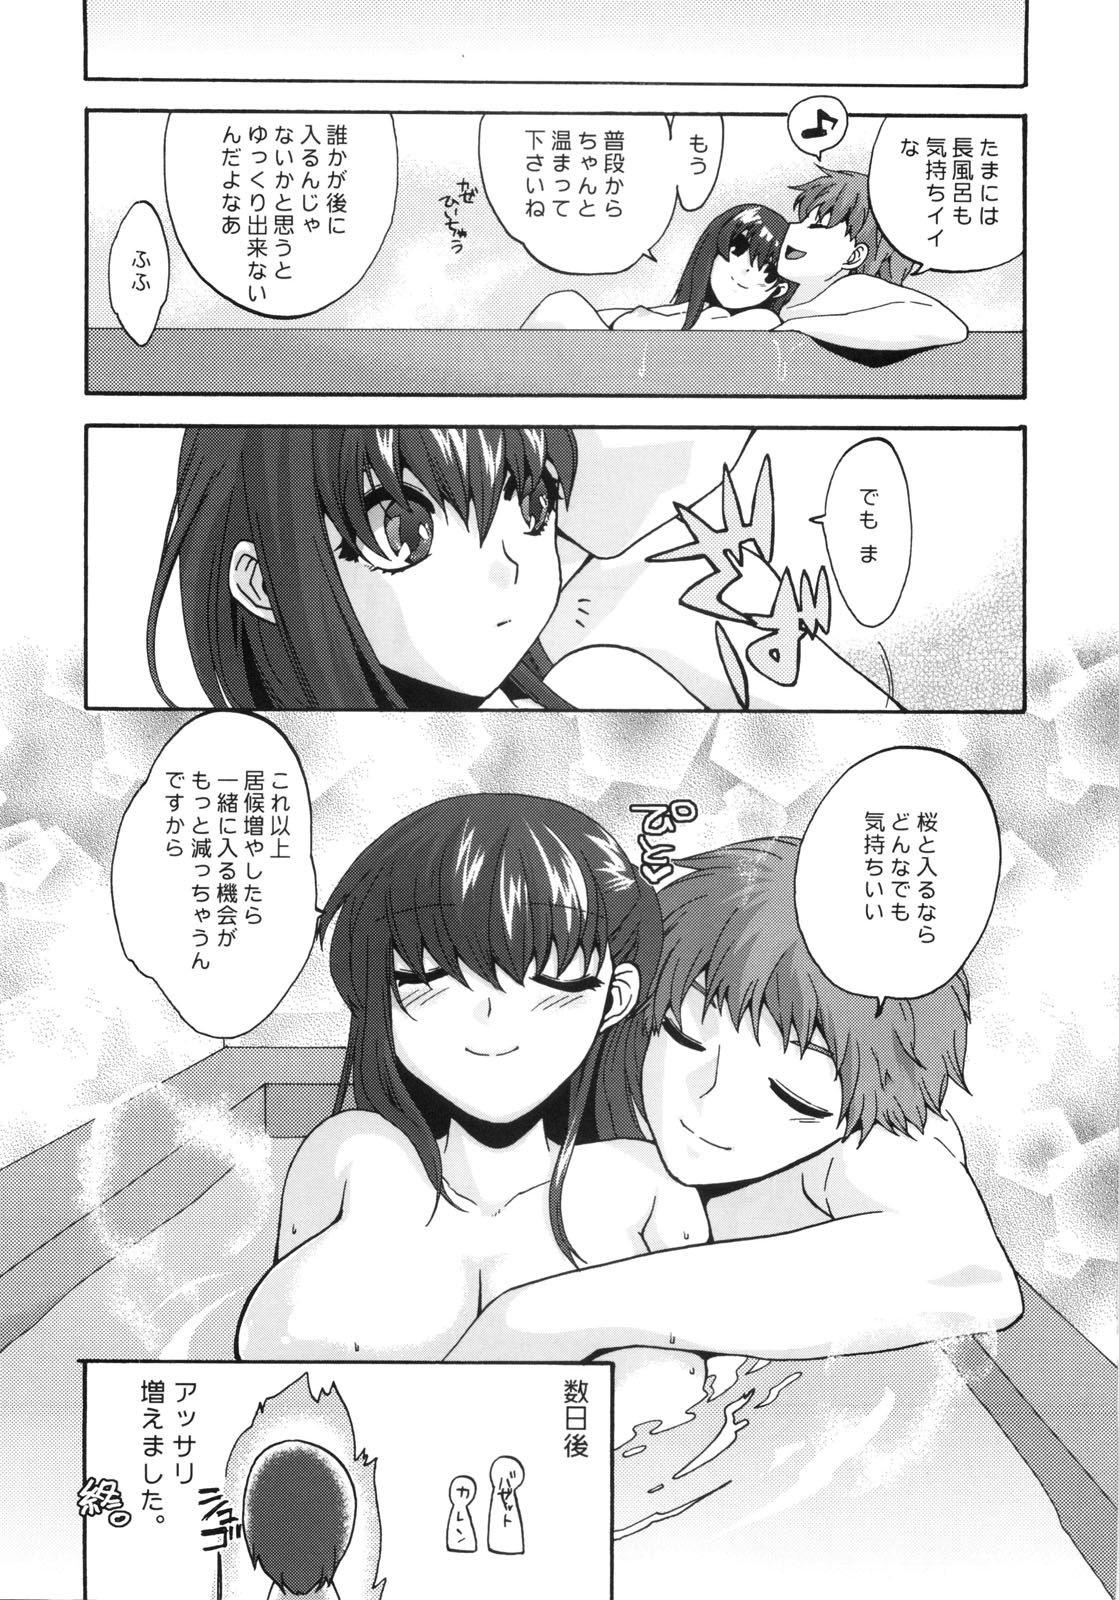 Perfect Tits cherry pie - Fate stay night Lesbos - Page 23